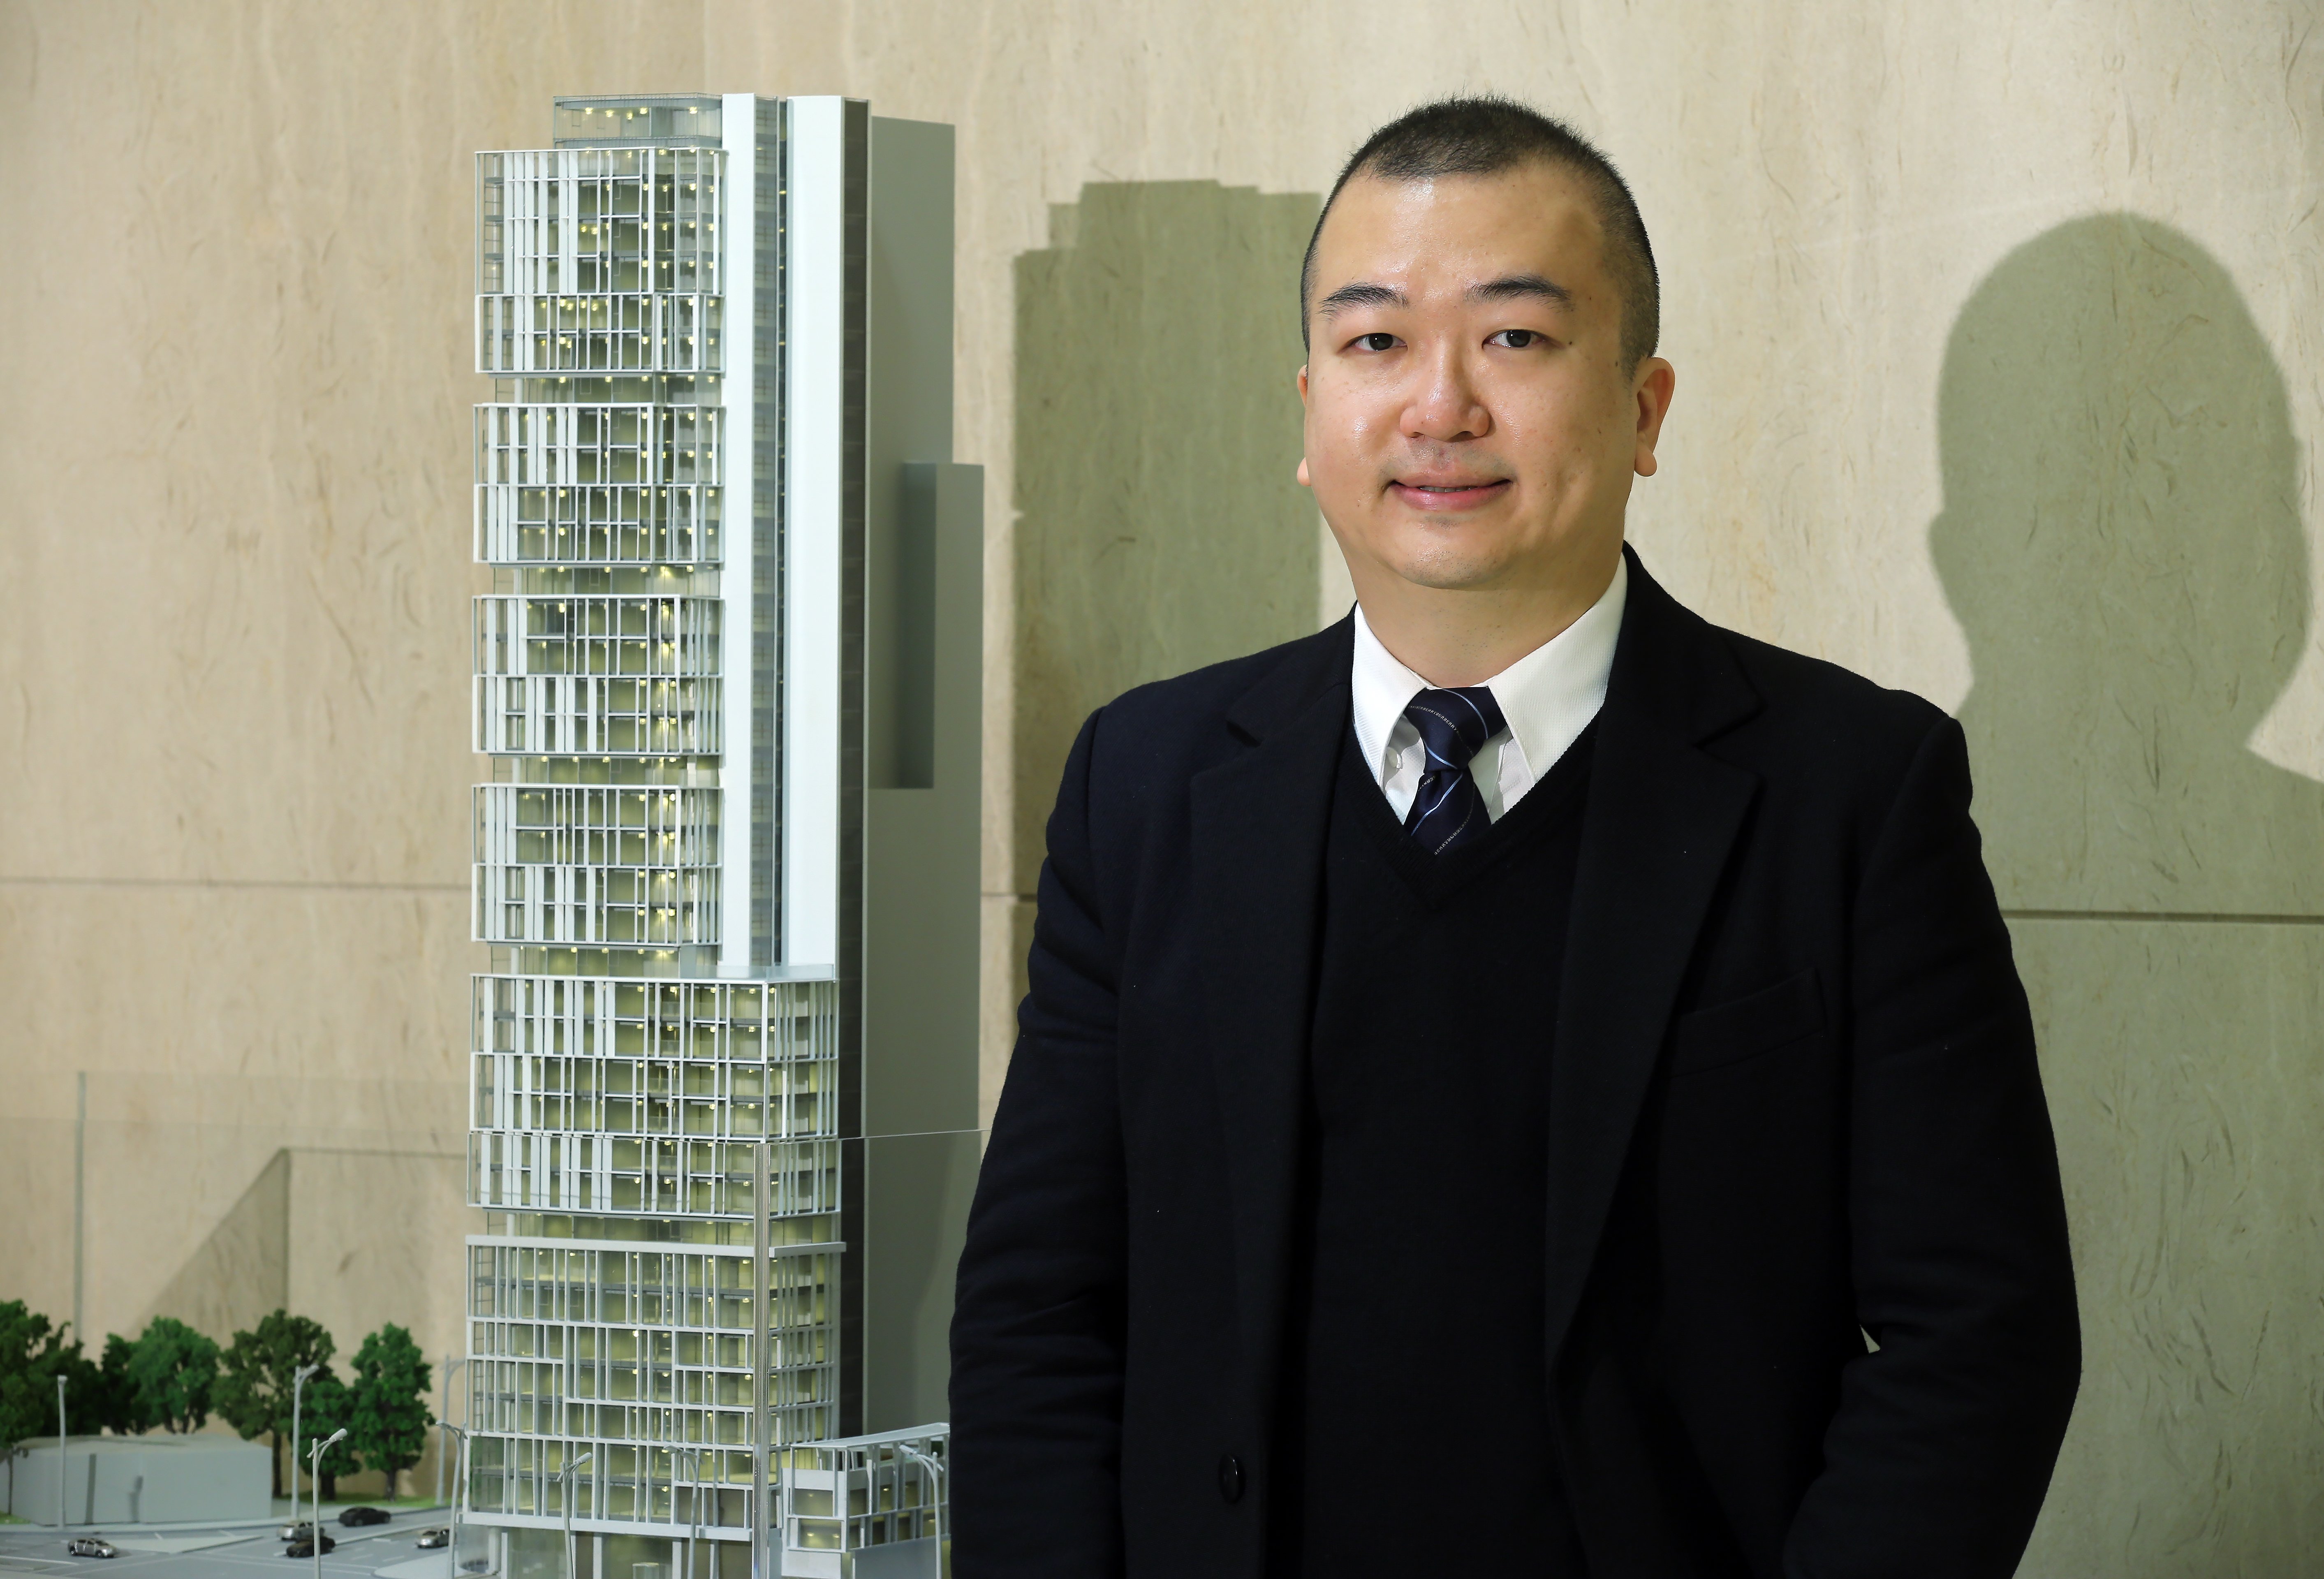 Jacky Chan Ka-yeung, Group Vice President of China Aoyuan Property Group poses picture at their office in Tsim Sha Tsui. 15JAN16 SCMP/Edward Wong